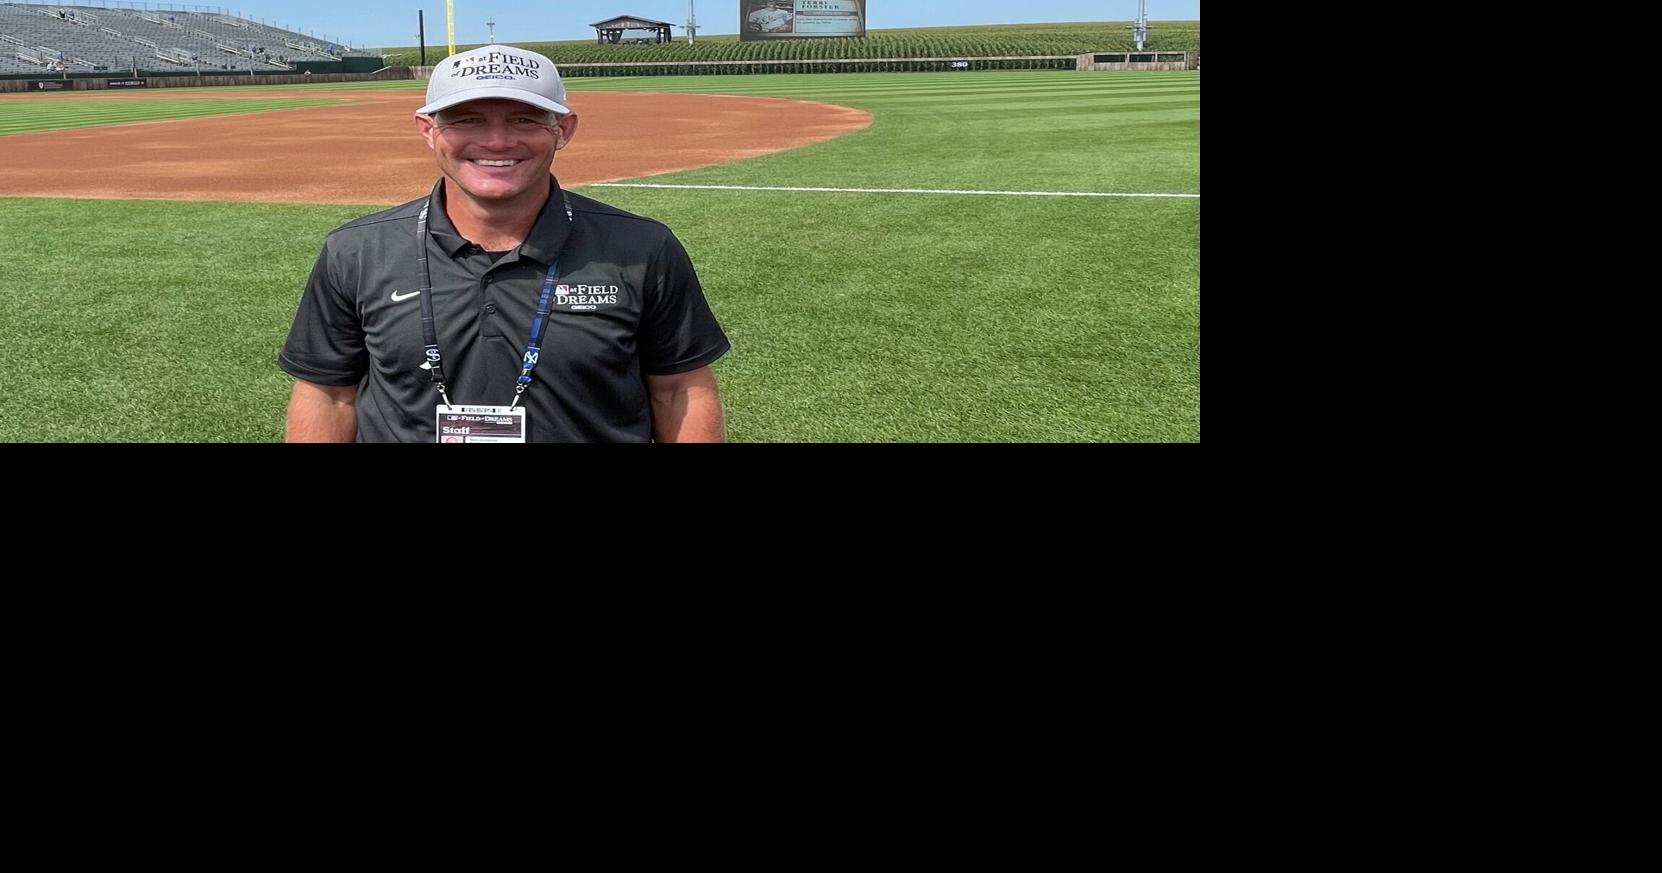 Watch Kevin Costner lead White Sox, Yankees onto Field of Dreams